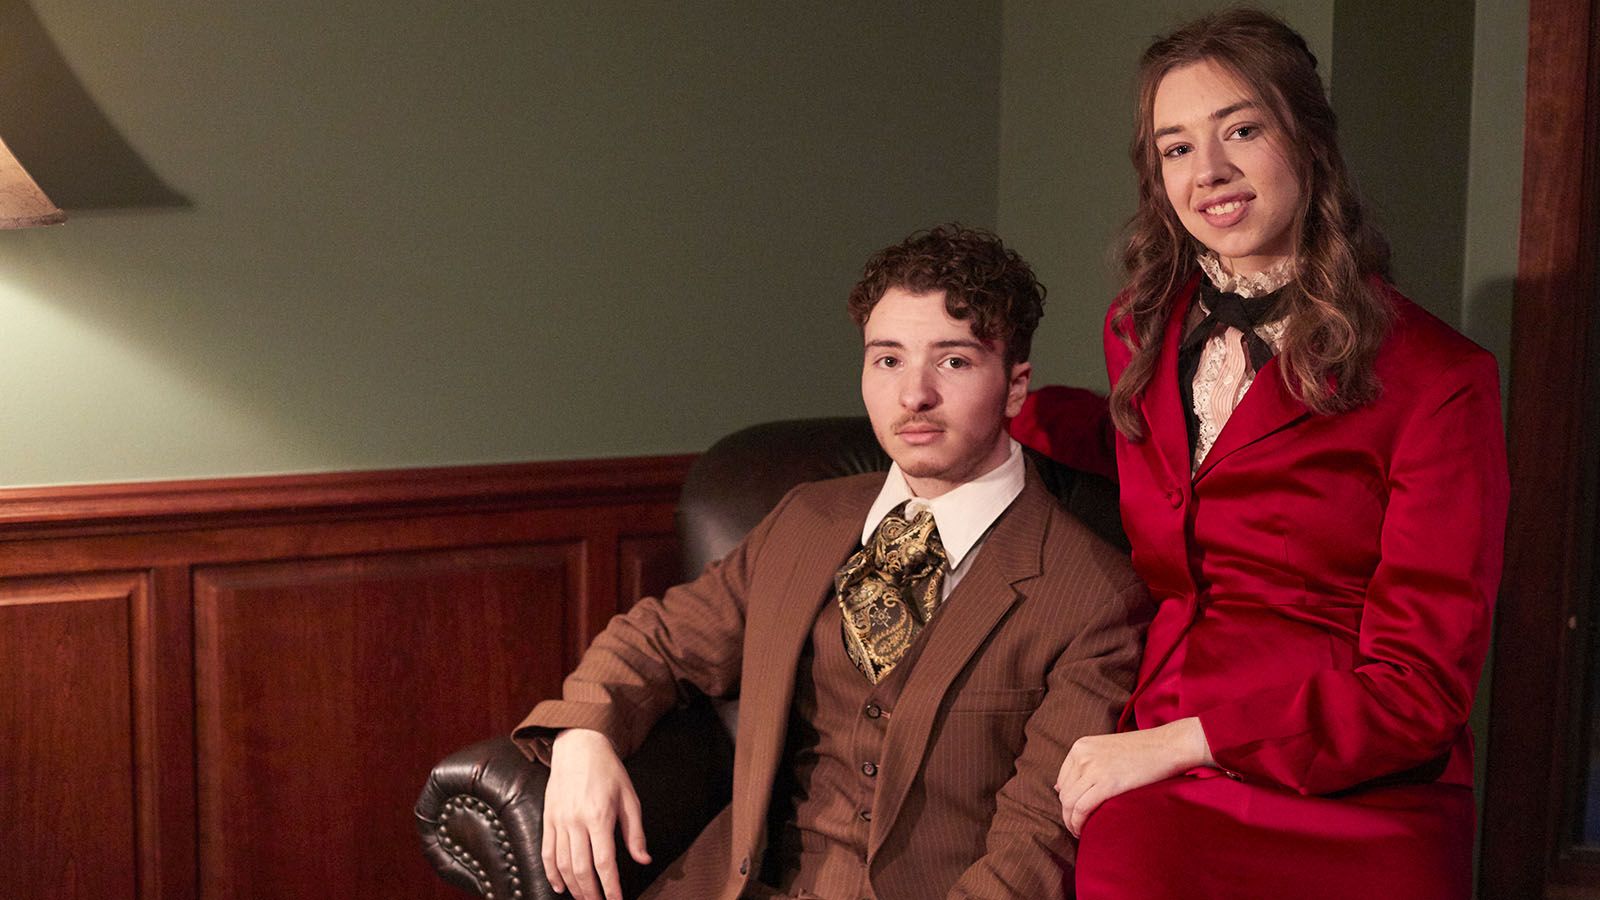 Scotty Frank and Sierra Harber star in all for One’s two-person musical Daddy Long Legs, opening Feb. 17 at PPG ArtsLab.